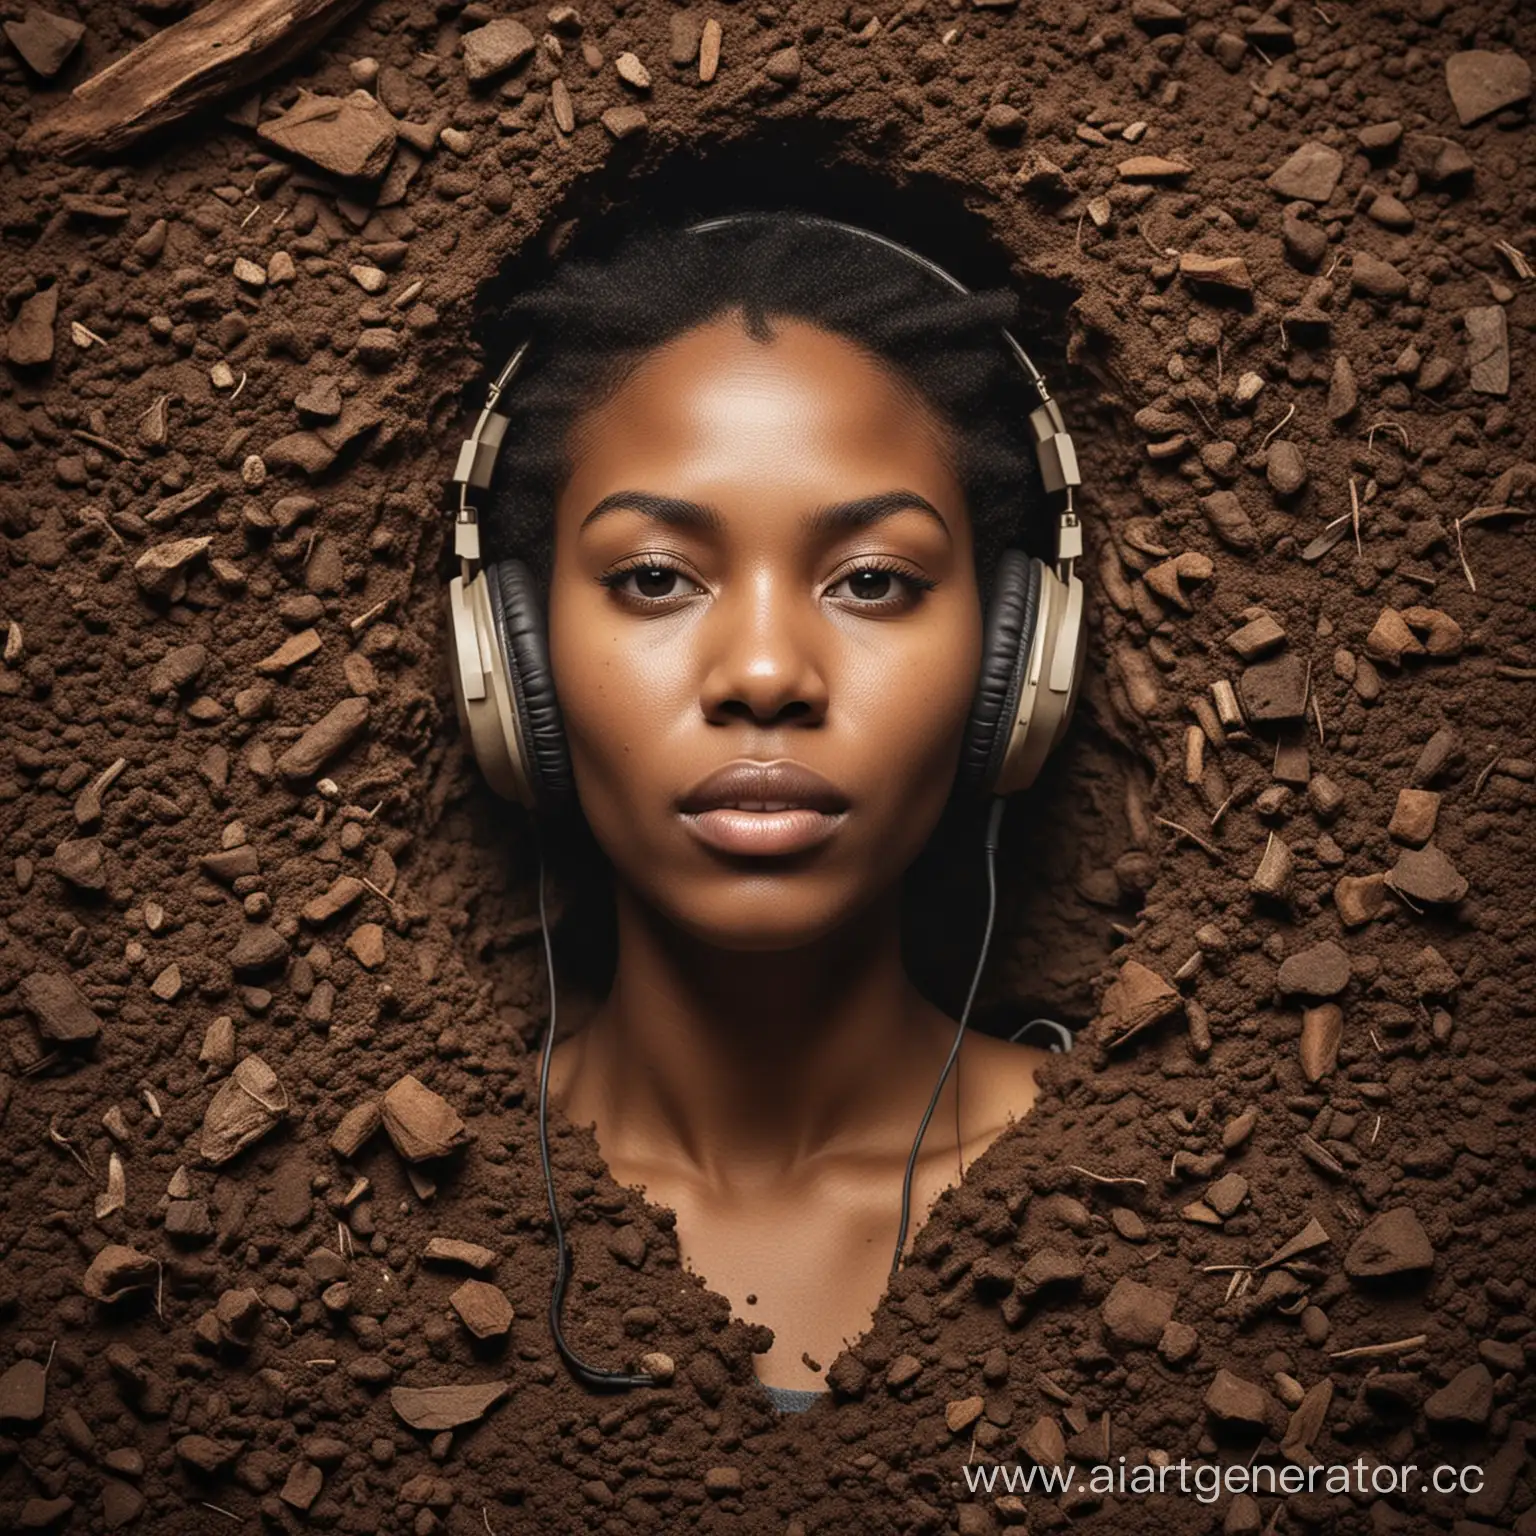 Come up with an image for a media company specializing in discovering and supporting the best underground artists and musicians. Theme: History in the soil, keep your ear sharp.